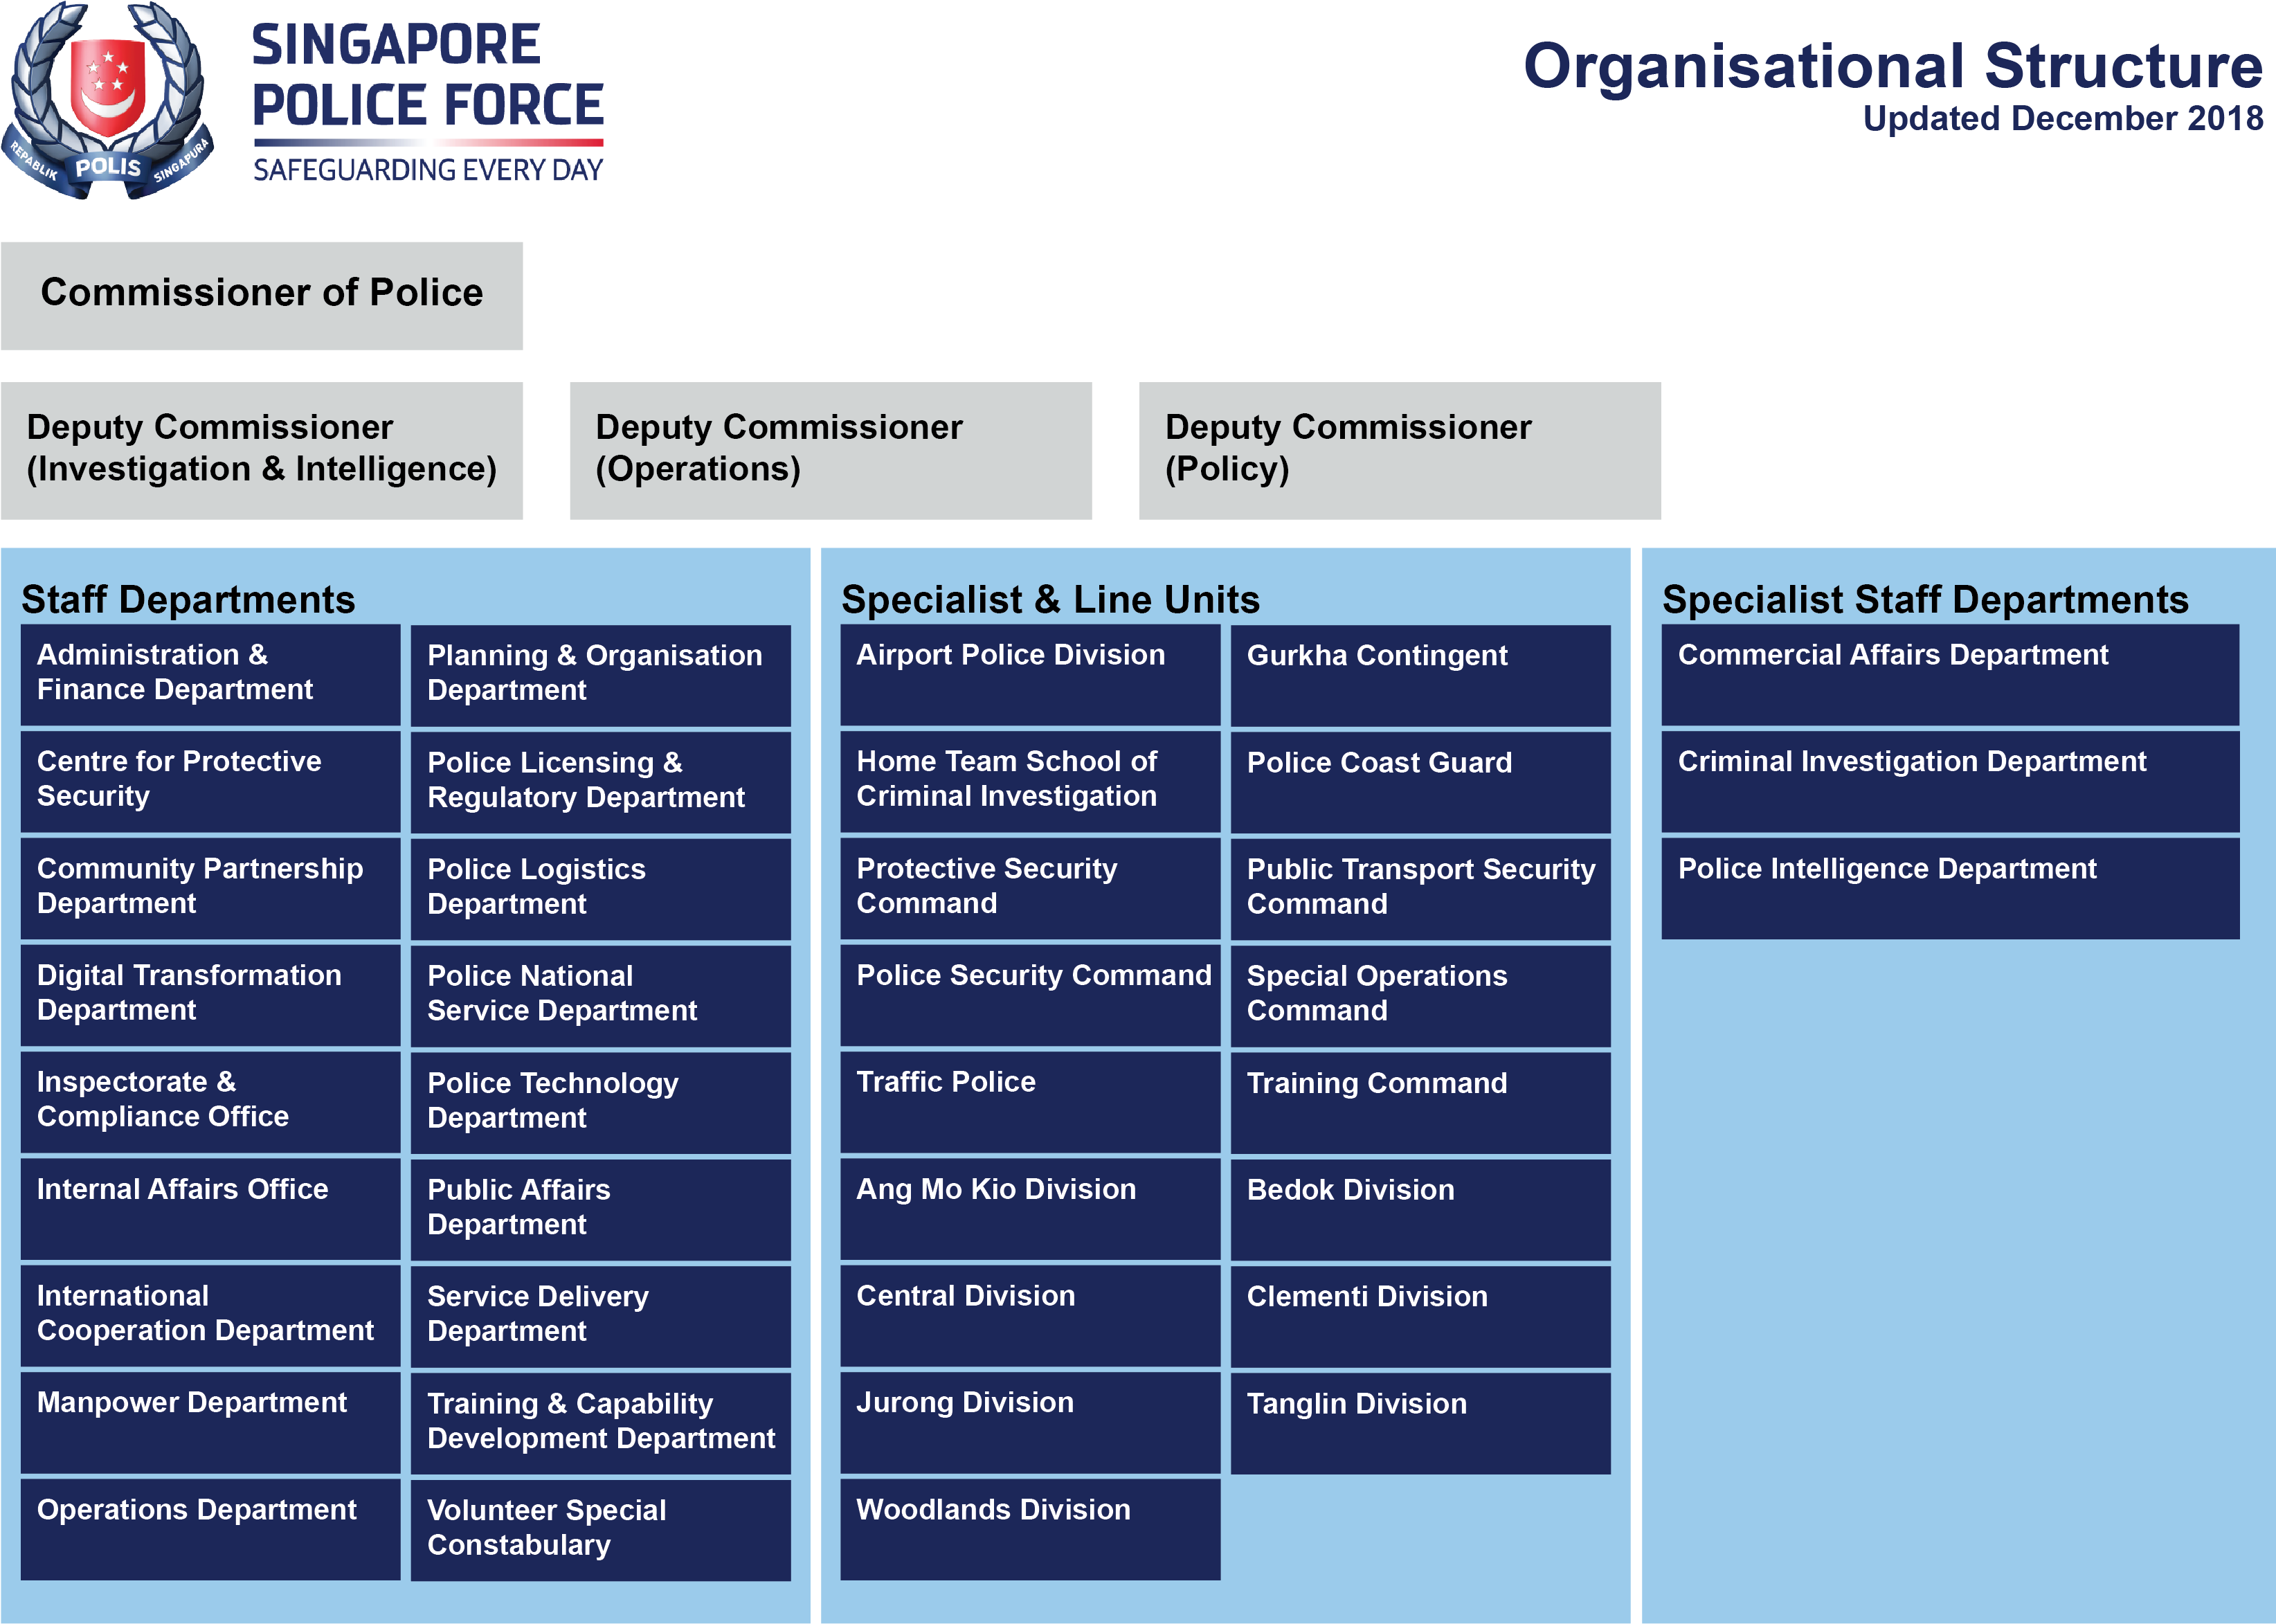 Download Spf Org Chart 20181217 01 Singapore Police Force Png